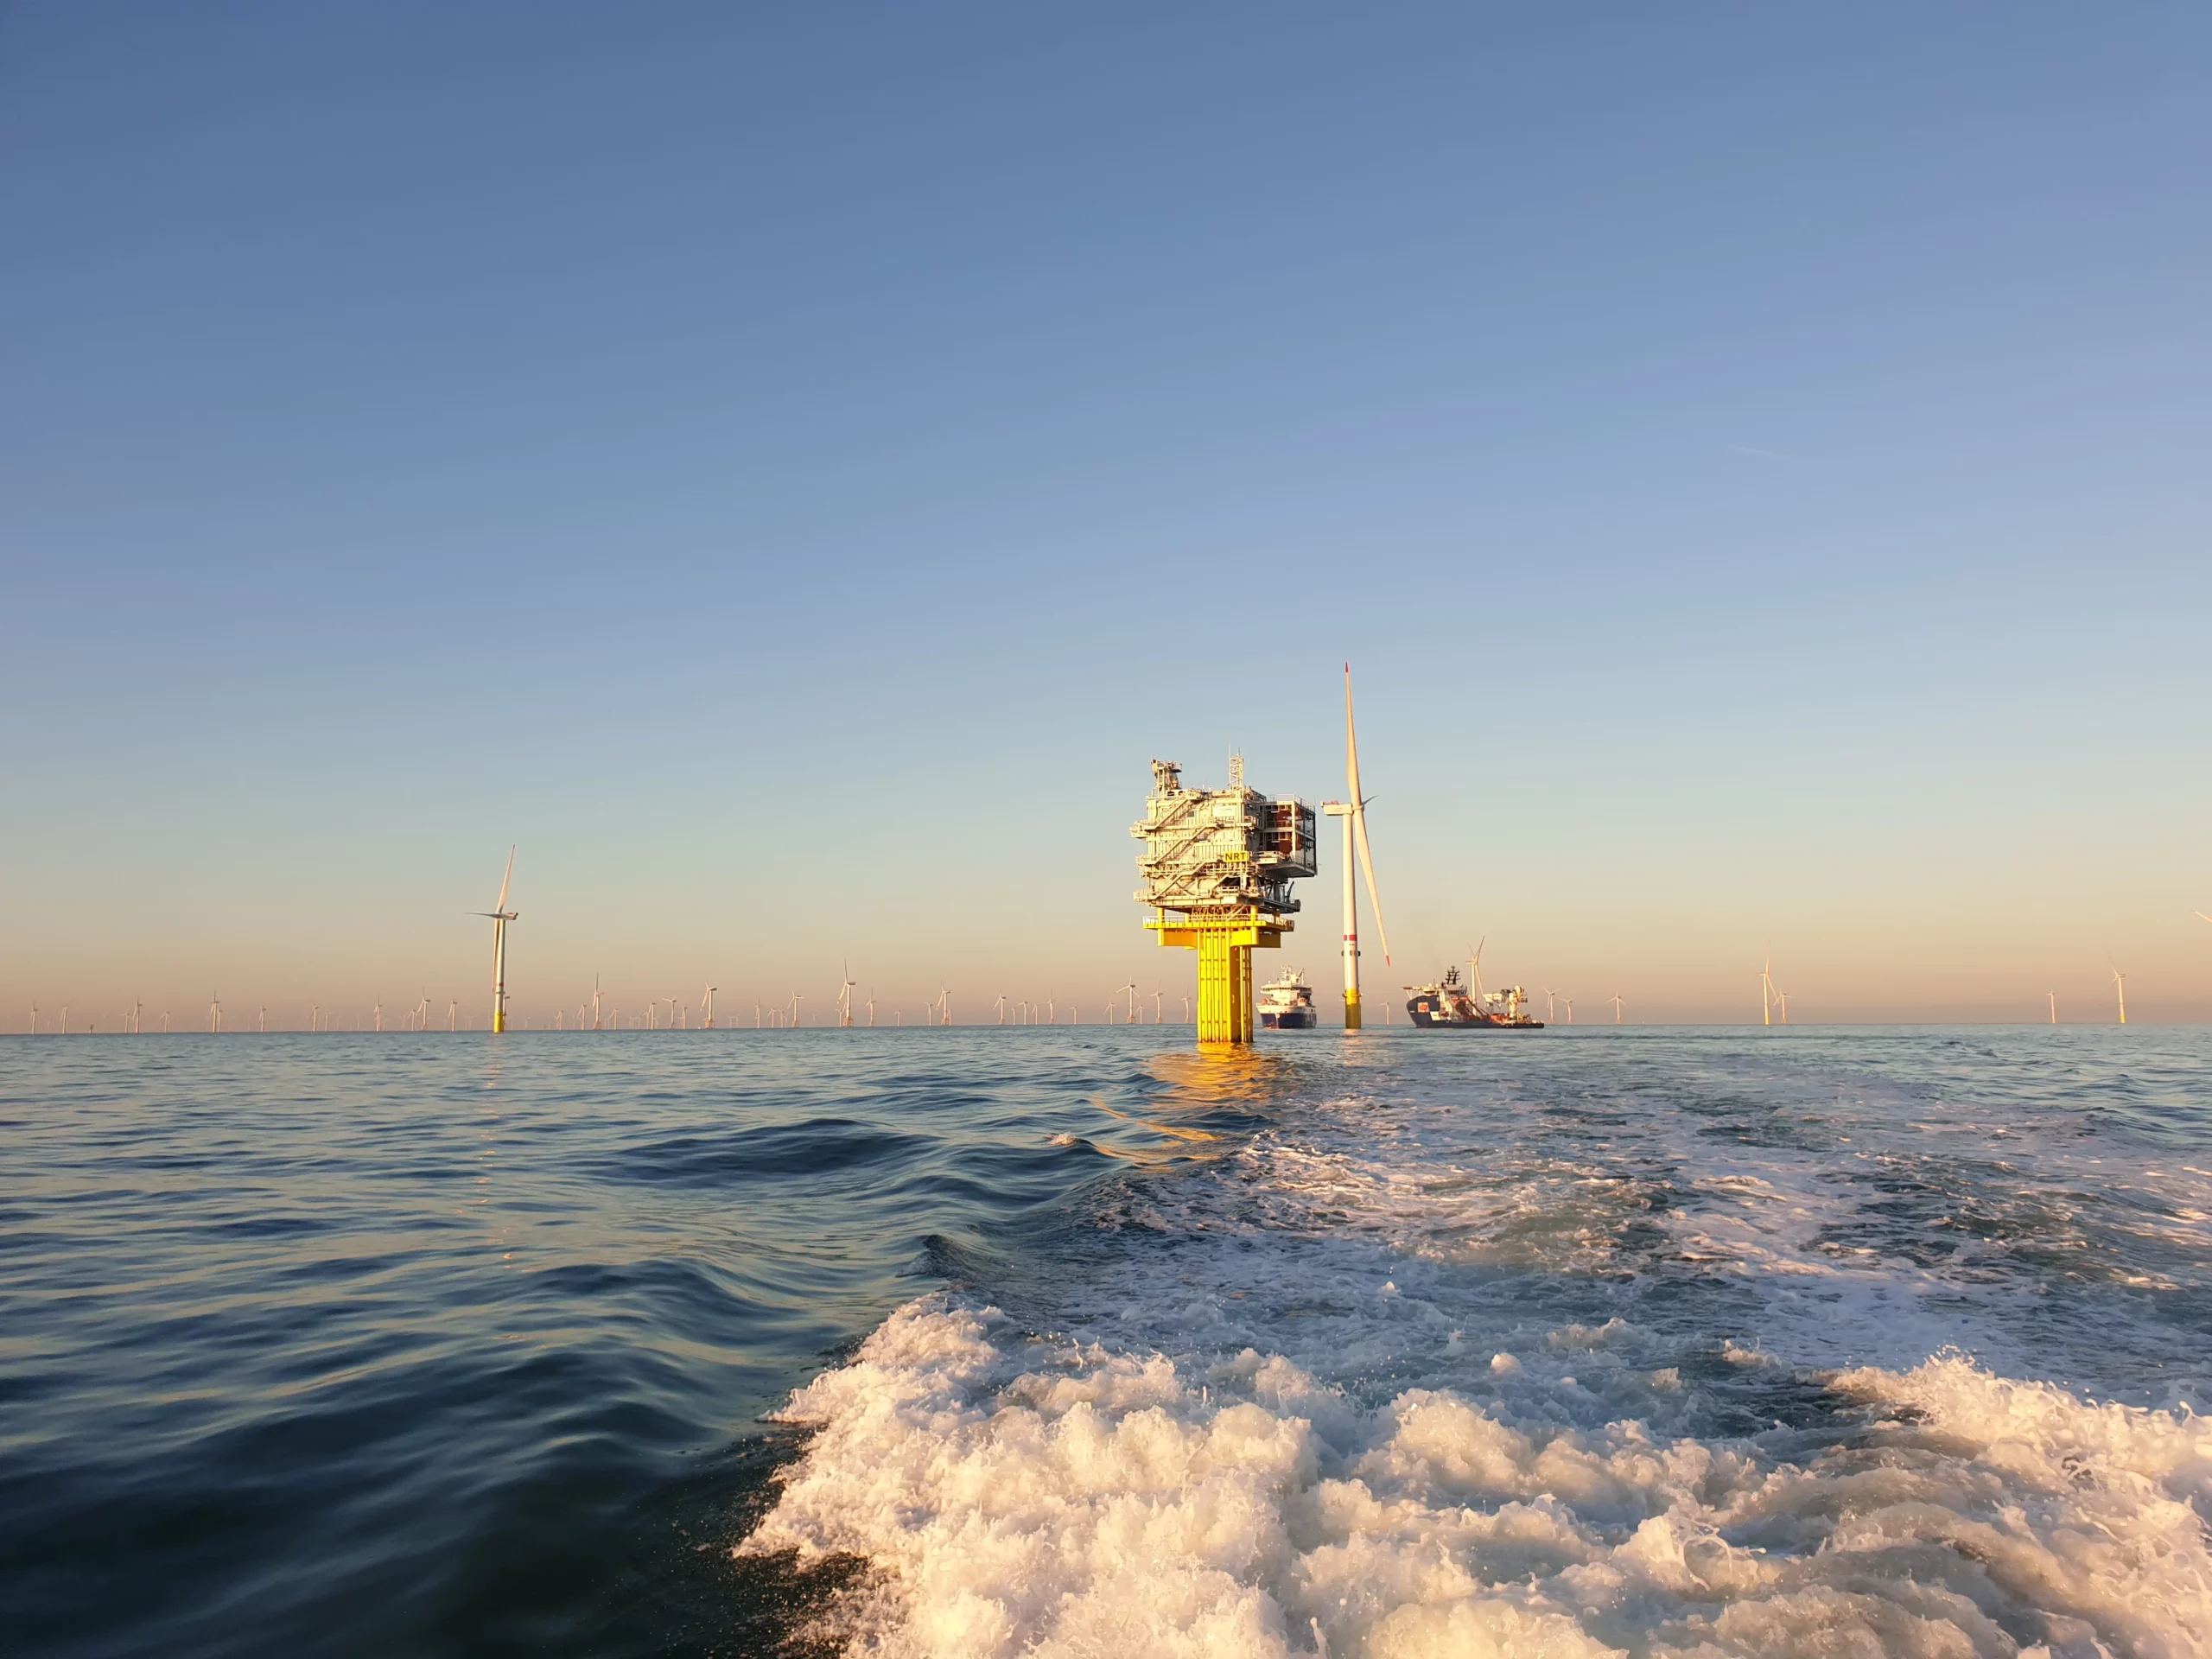 offshore wind farm with vessels and substation